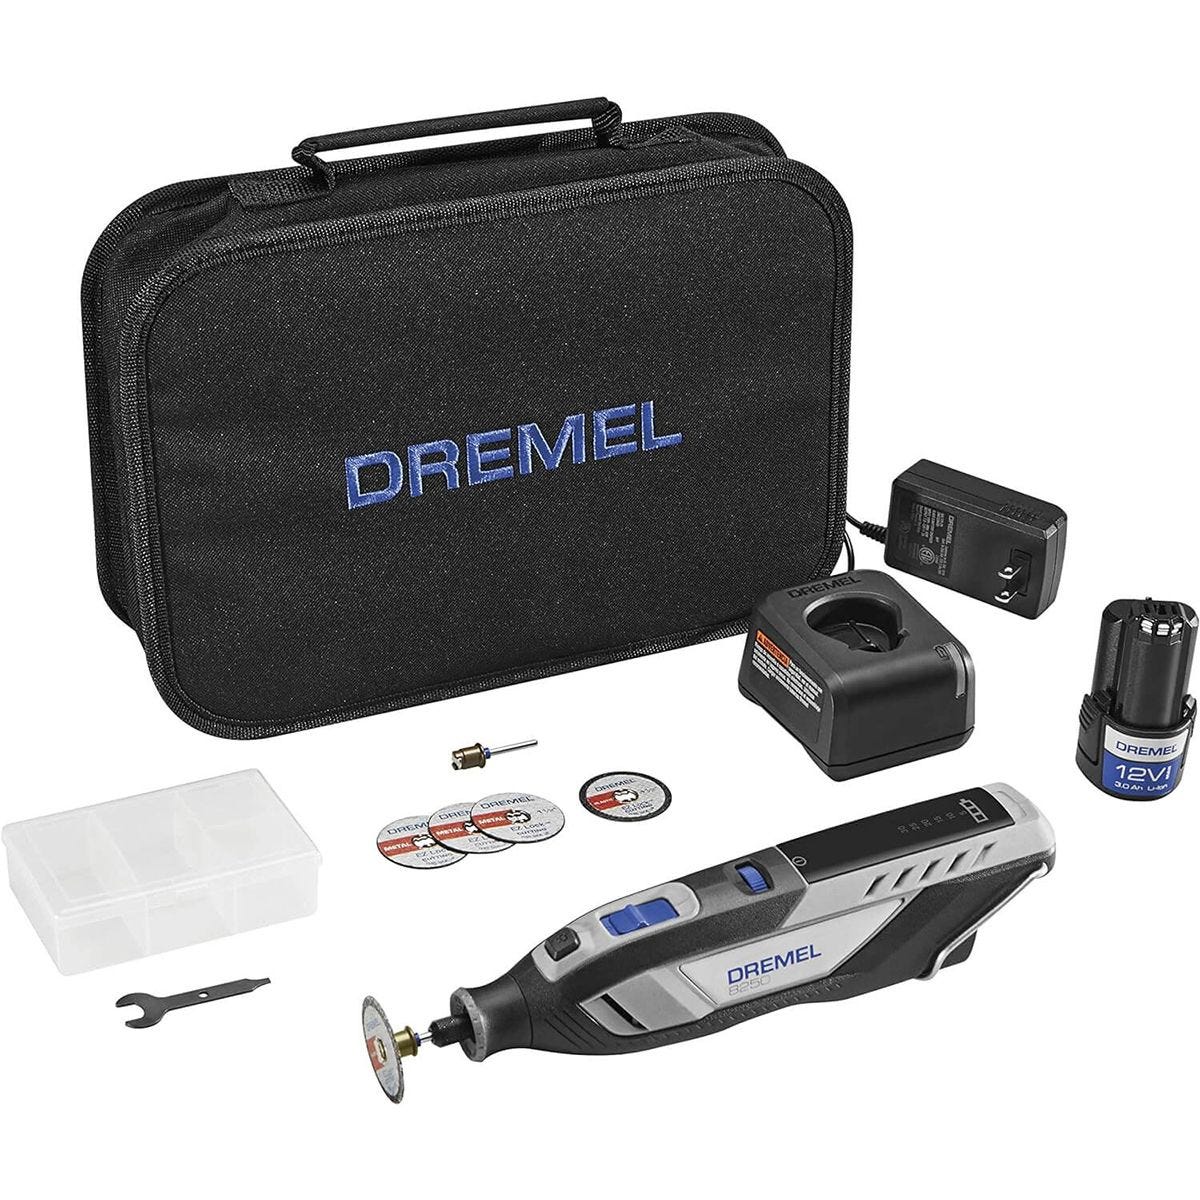 Dremel 4300 Rotary Tool Kit Includes it All + Easy Storage